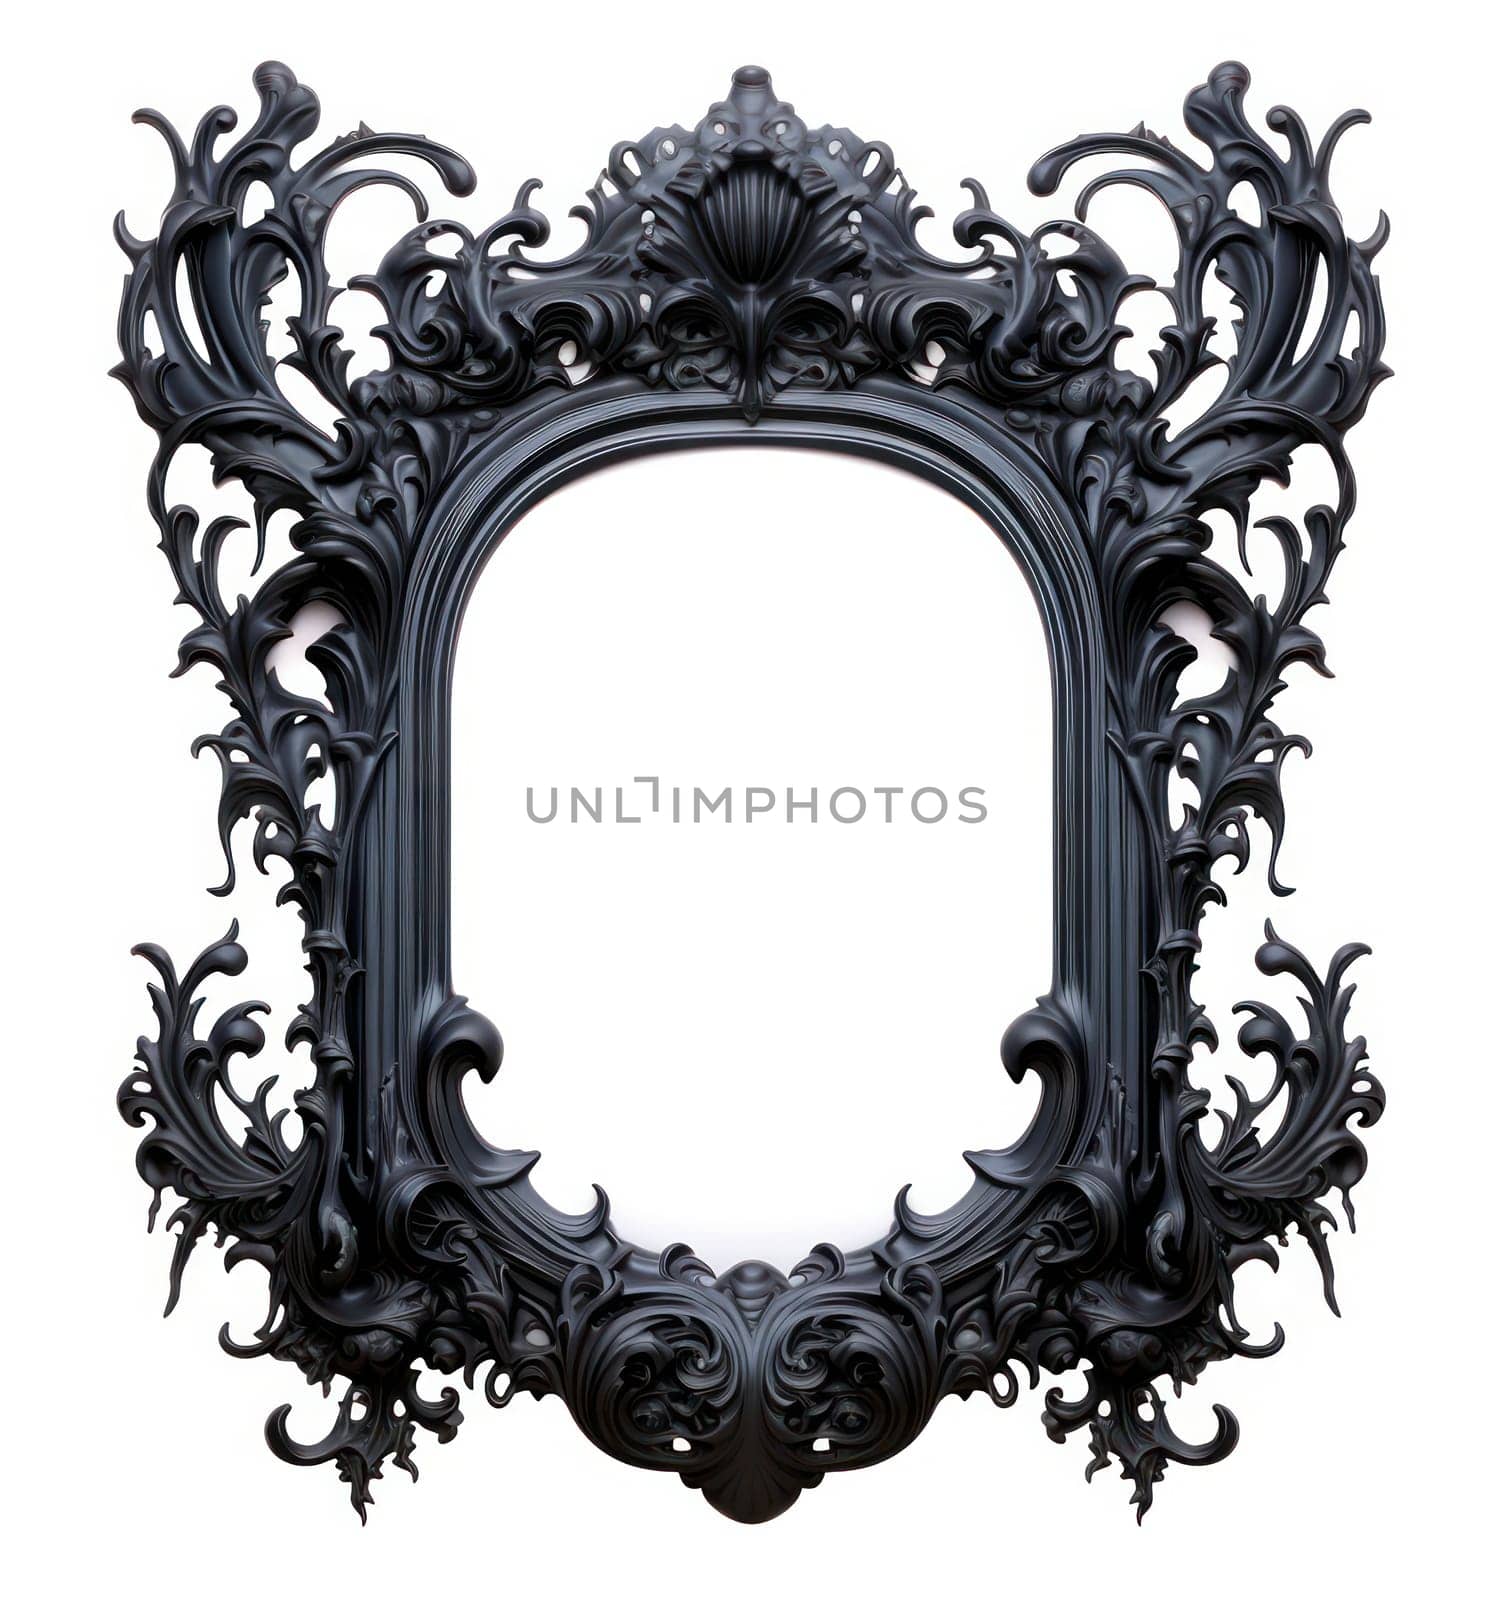 Ancient Elegance: Ornate Antique Picture Frame with Golden Baroque Design on White Background